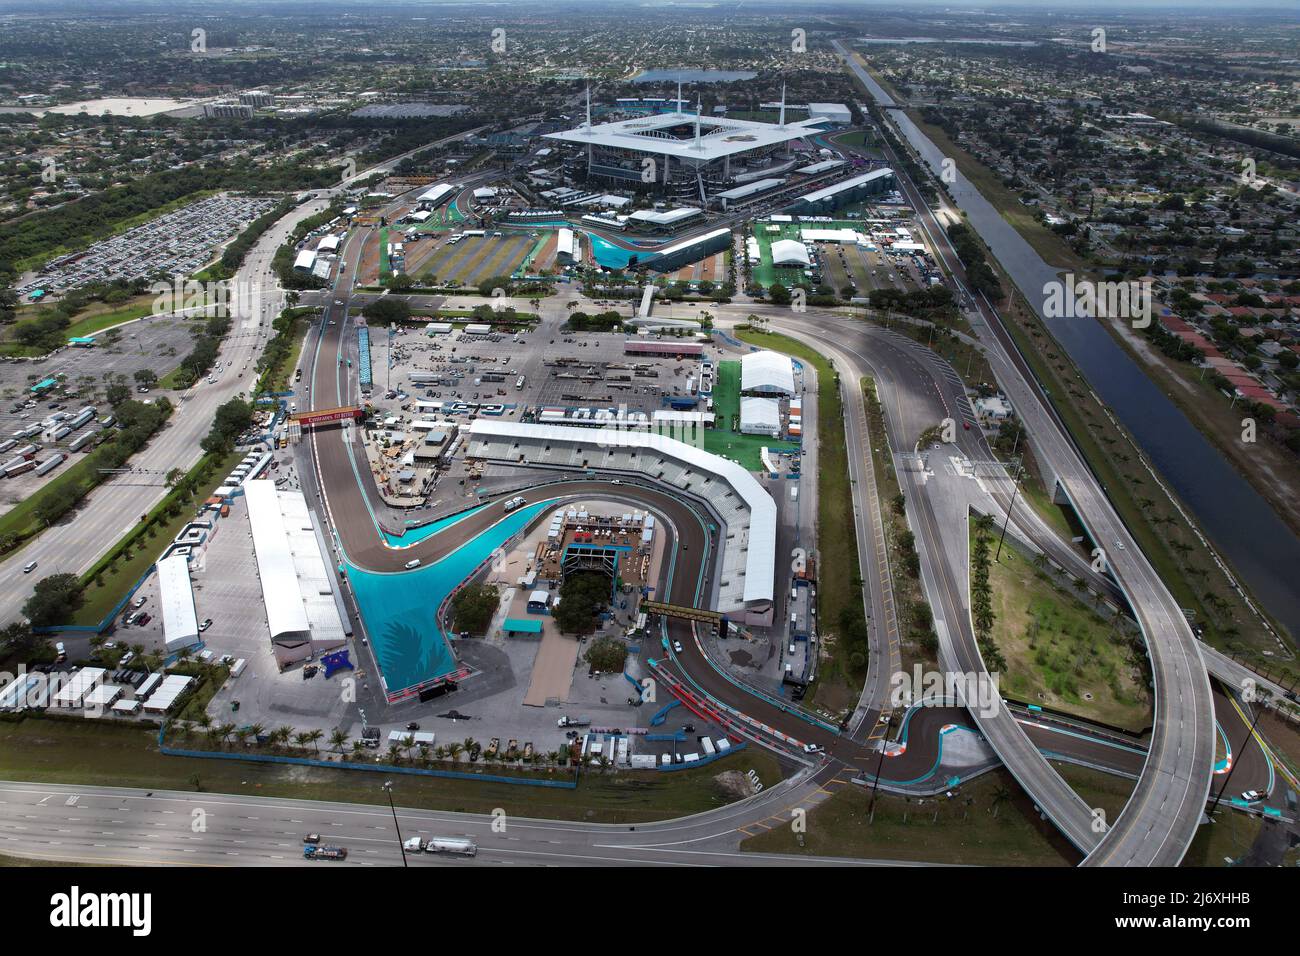 An aerial view of F1 race course for the Miami Grand Prix at Hard Rock